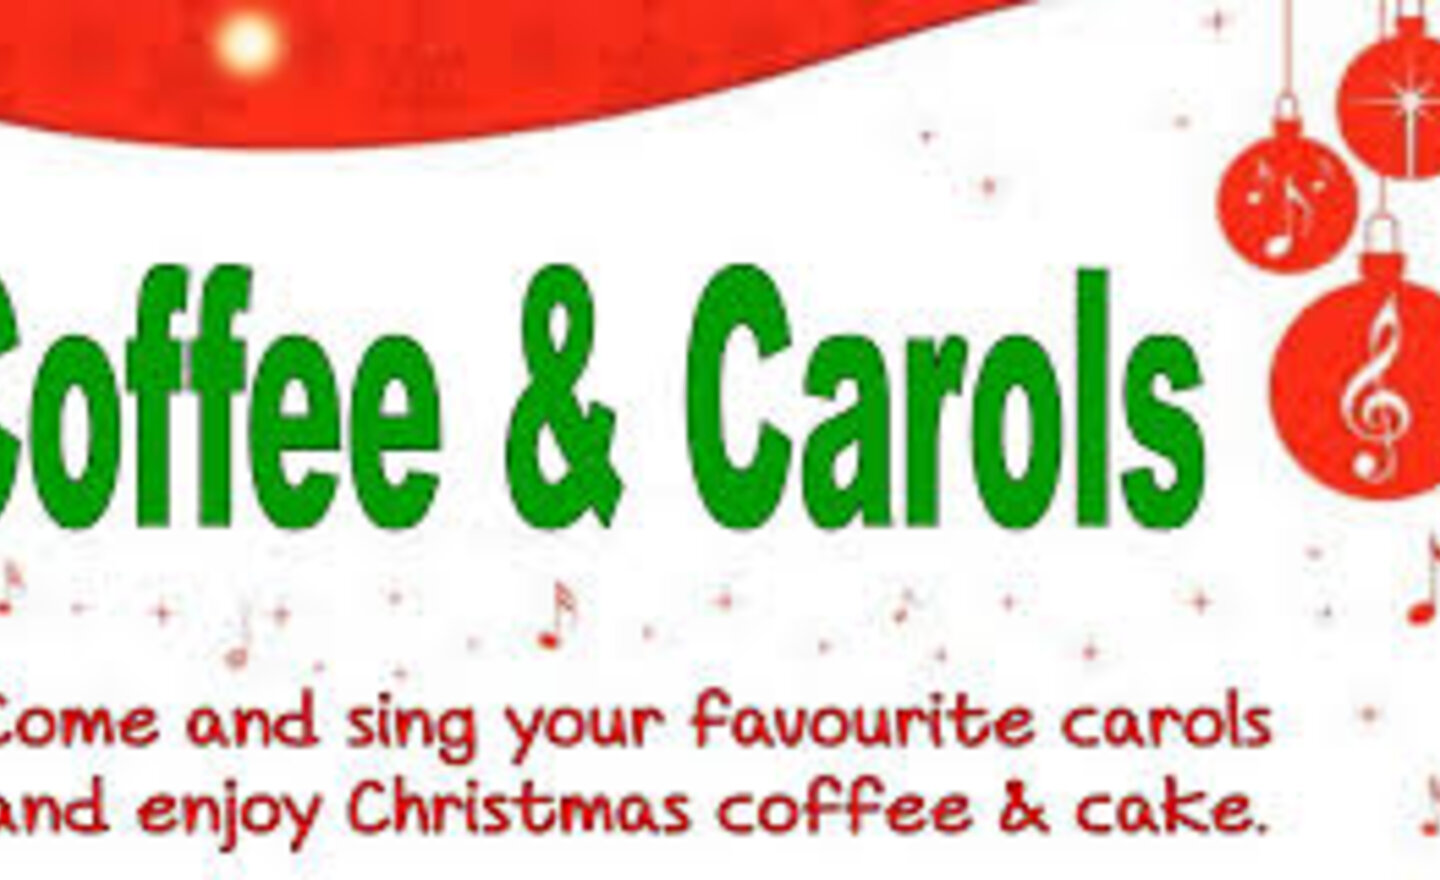 Image of Coffee, Carols and Cake Afternoon